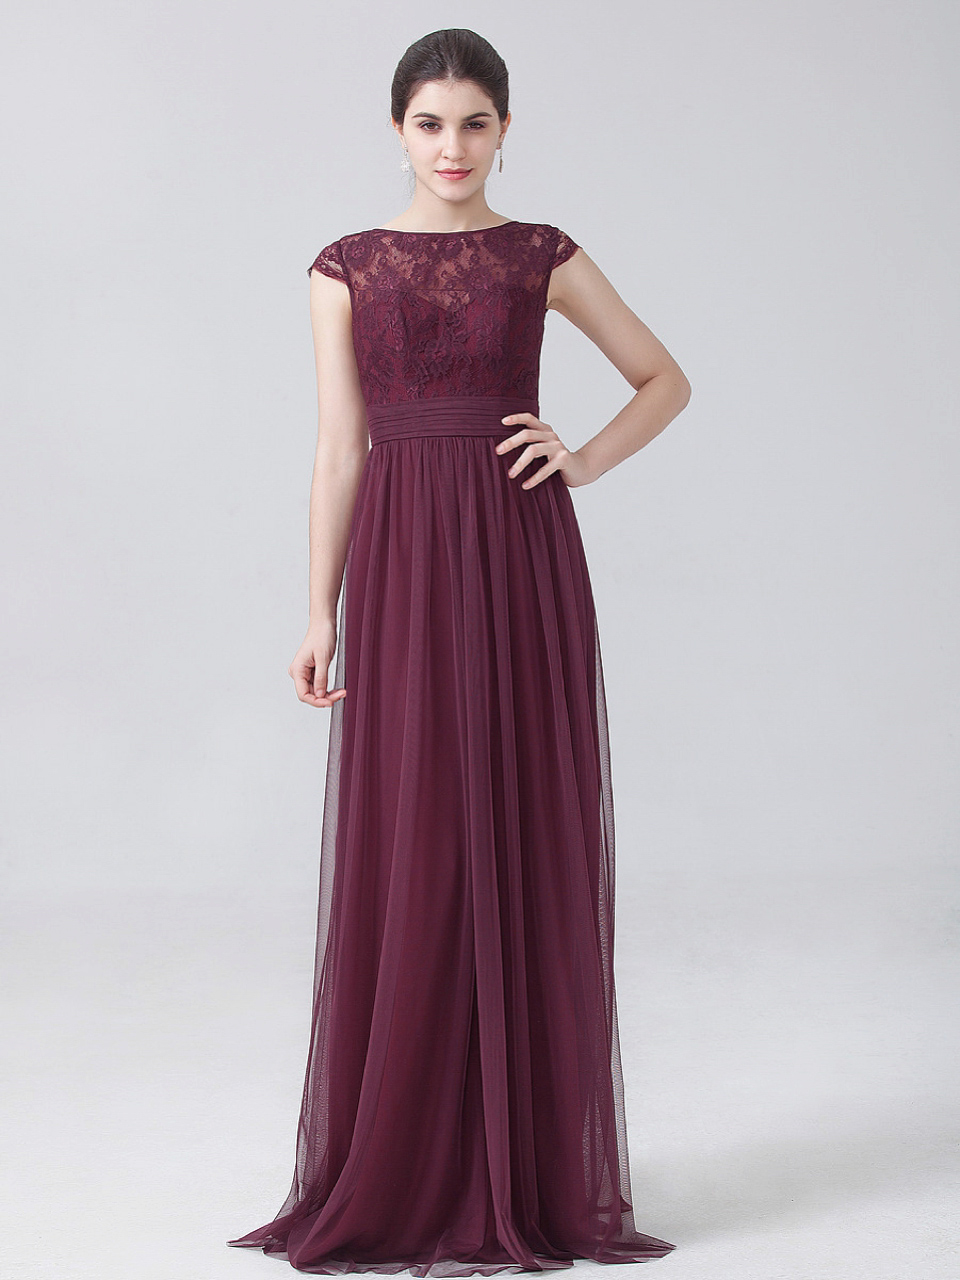 It's May sale time! Up to 30% off bridesmaids dresses from 'For Her And For Him'.